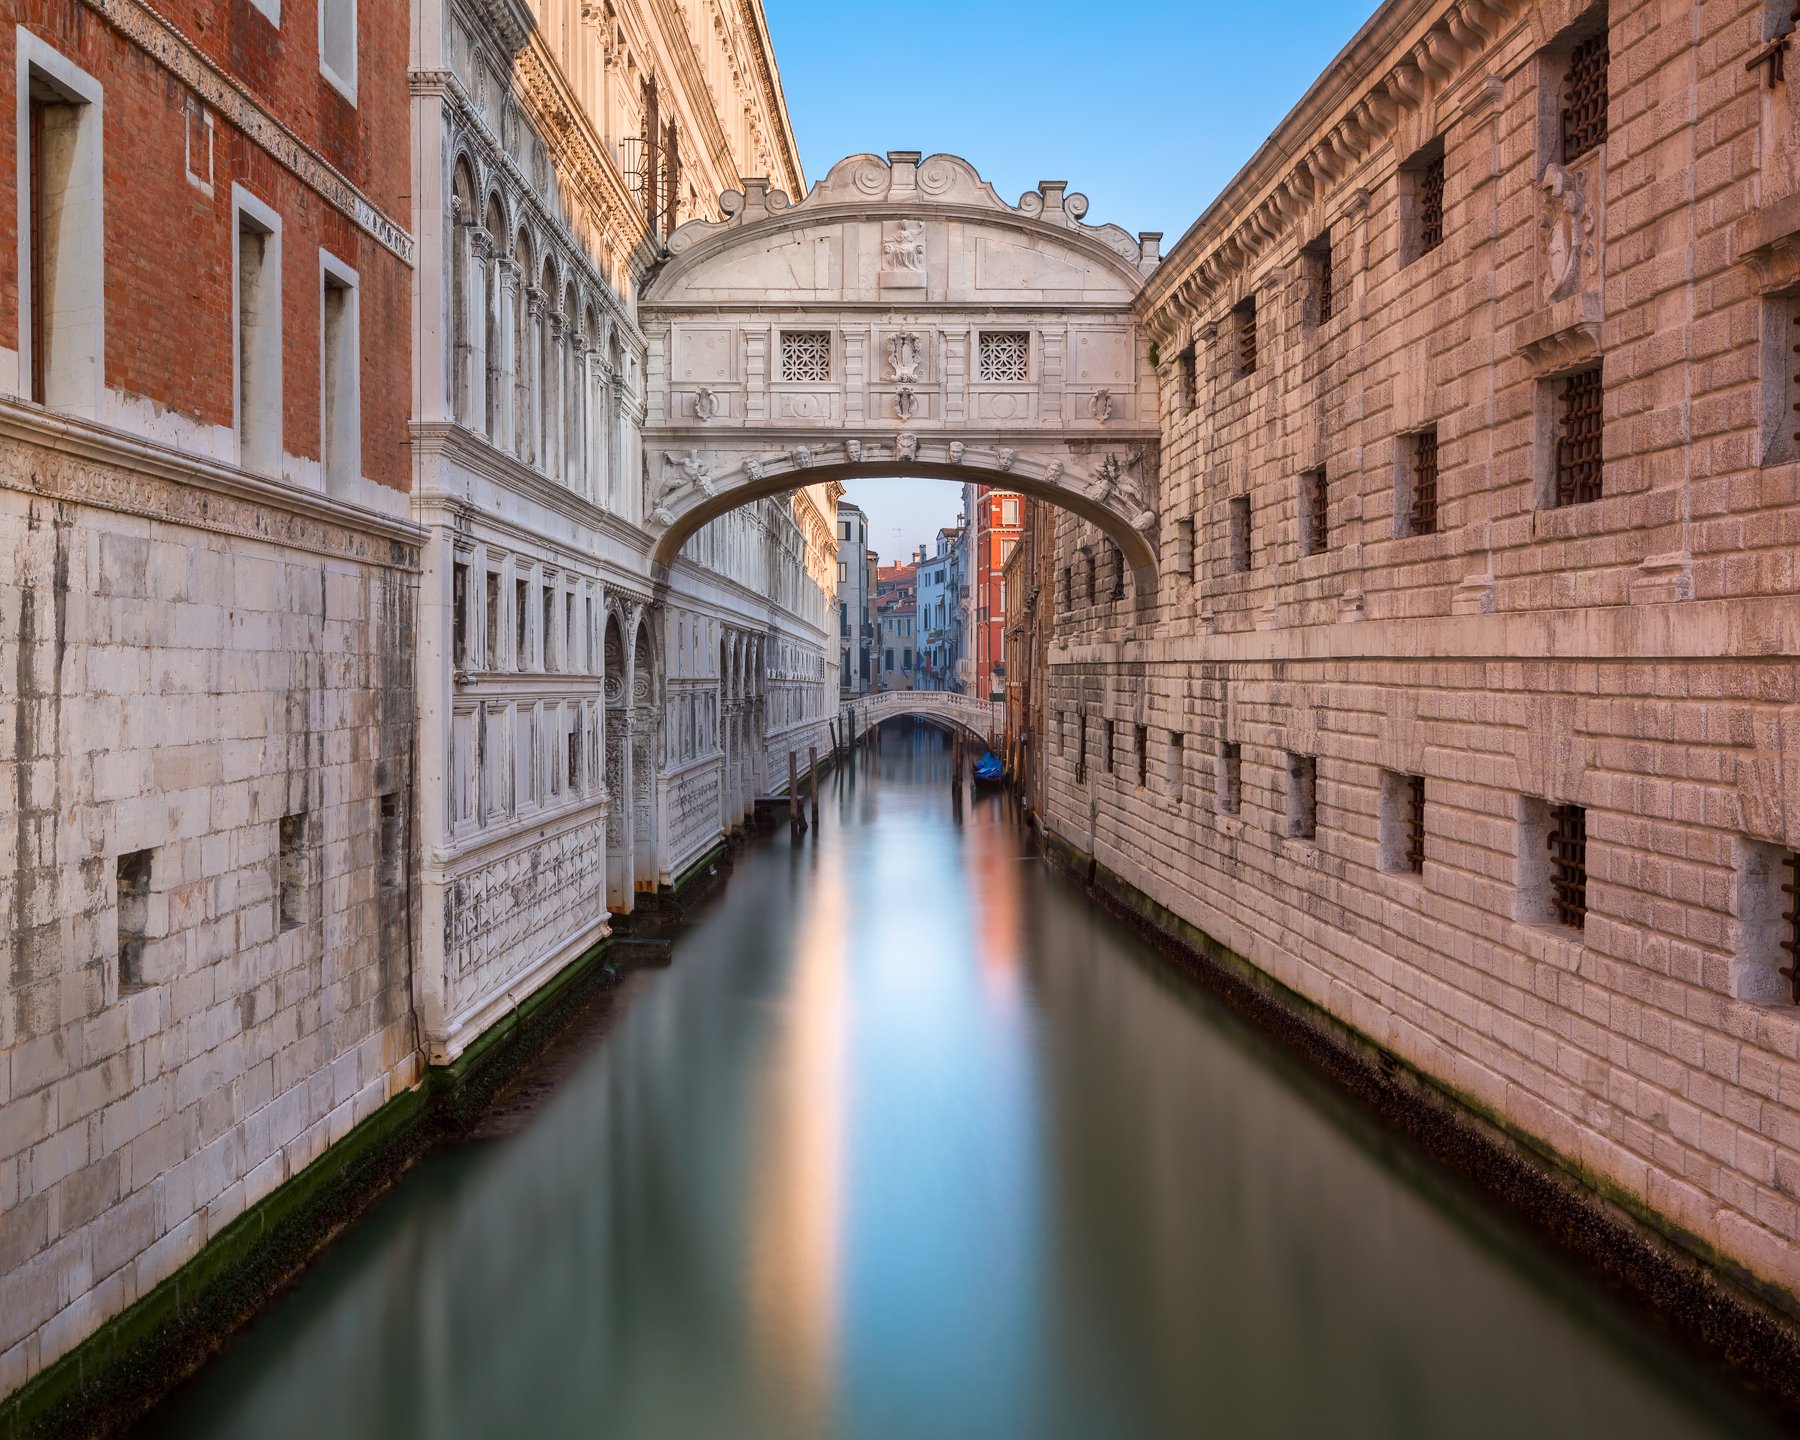 arc, architecture, attraction, bridge, building, canal, channel, city, cityscape, culture, doge, dungeon, europe, european, facade, famous, gondola, heritage, history, island, italia, italian, italy, jail, landmark, landscape, medieval, old, palace, palaz, Andrey Omelyanchuk